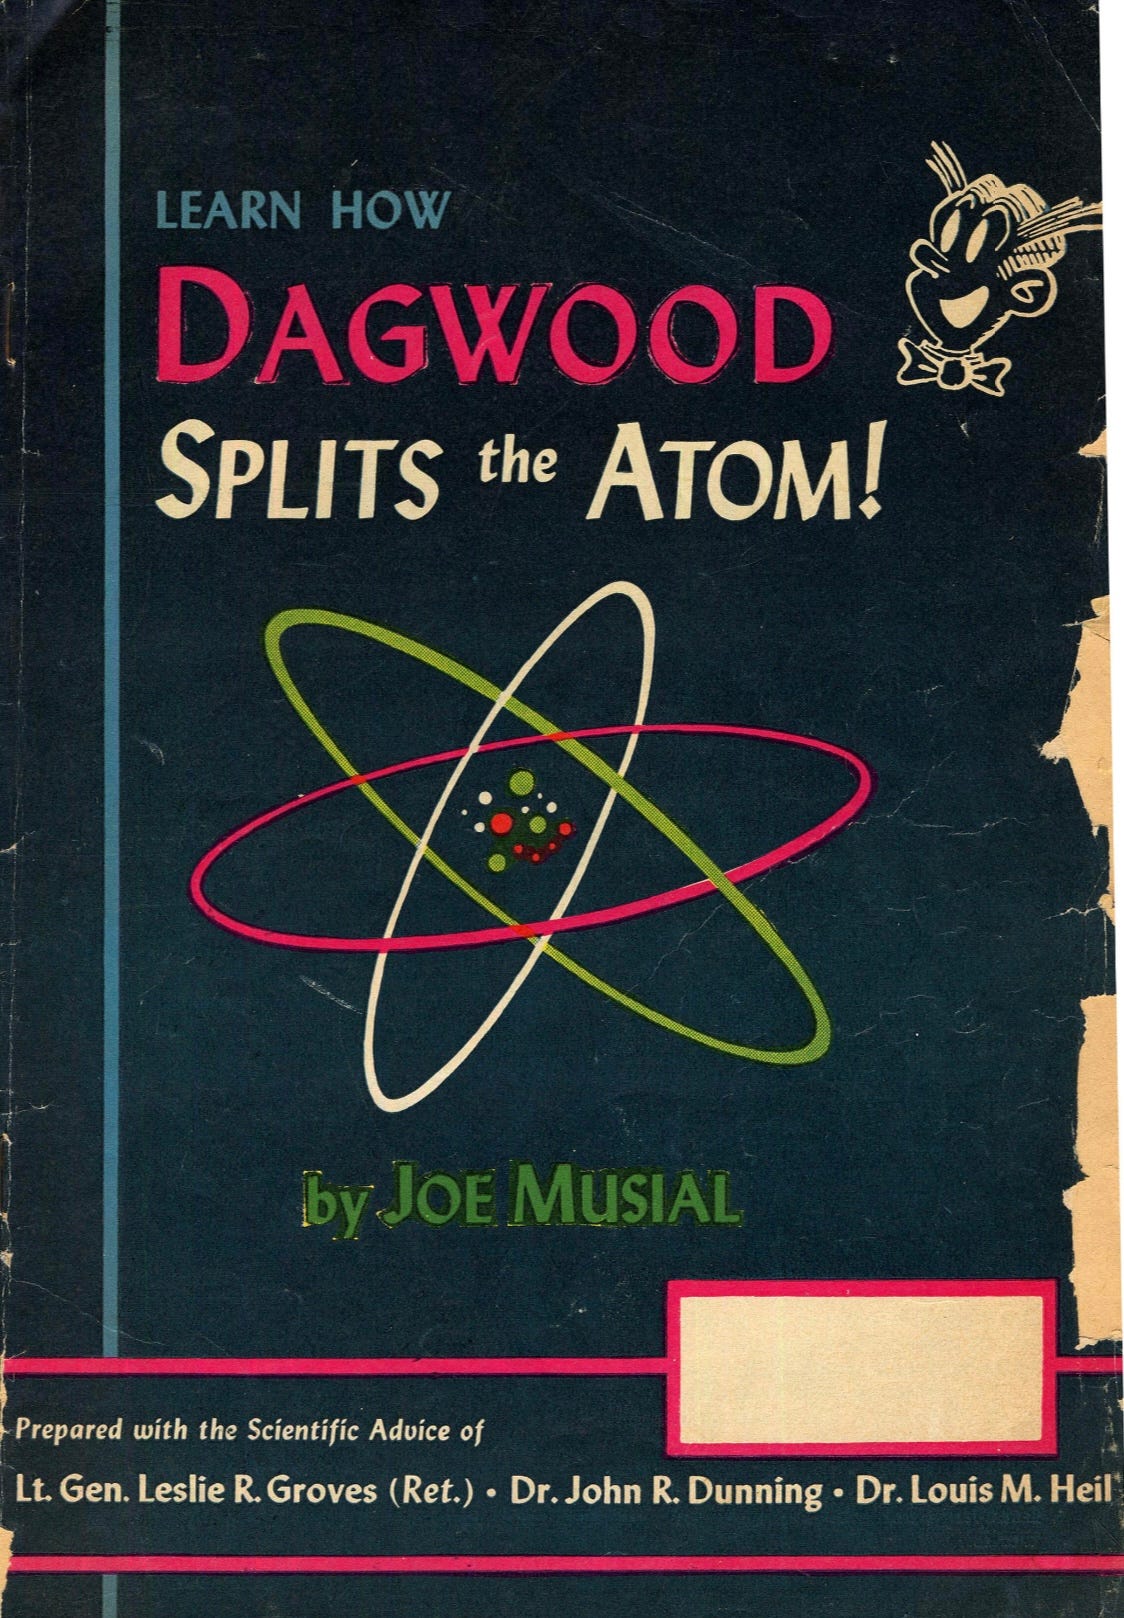 Cover for the comic book, Dagwood Splits the Atom!